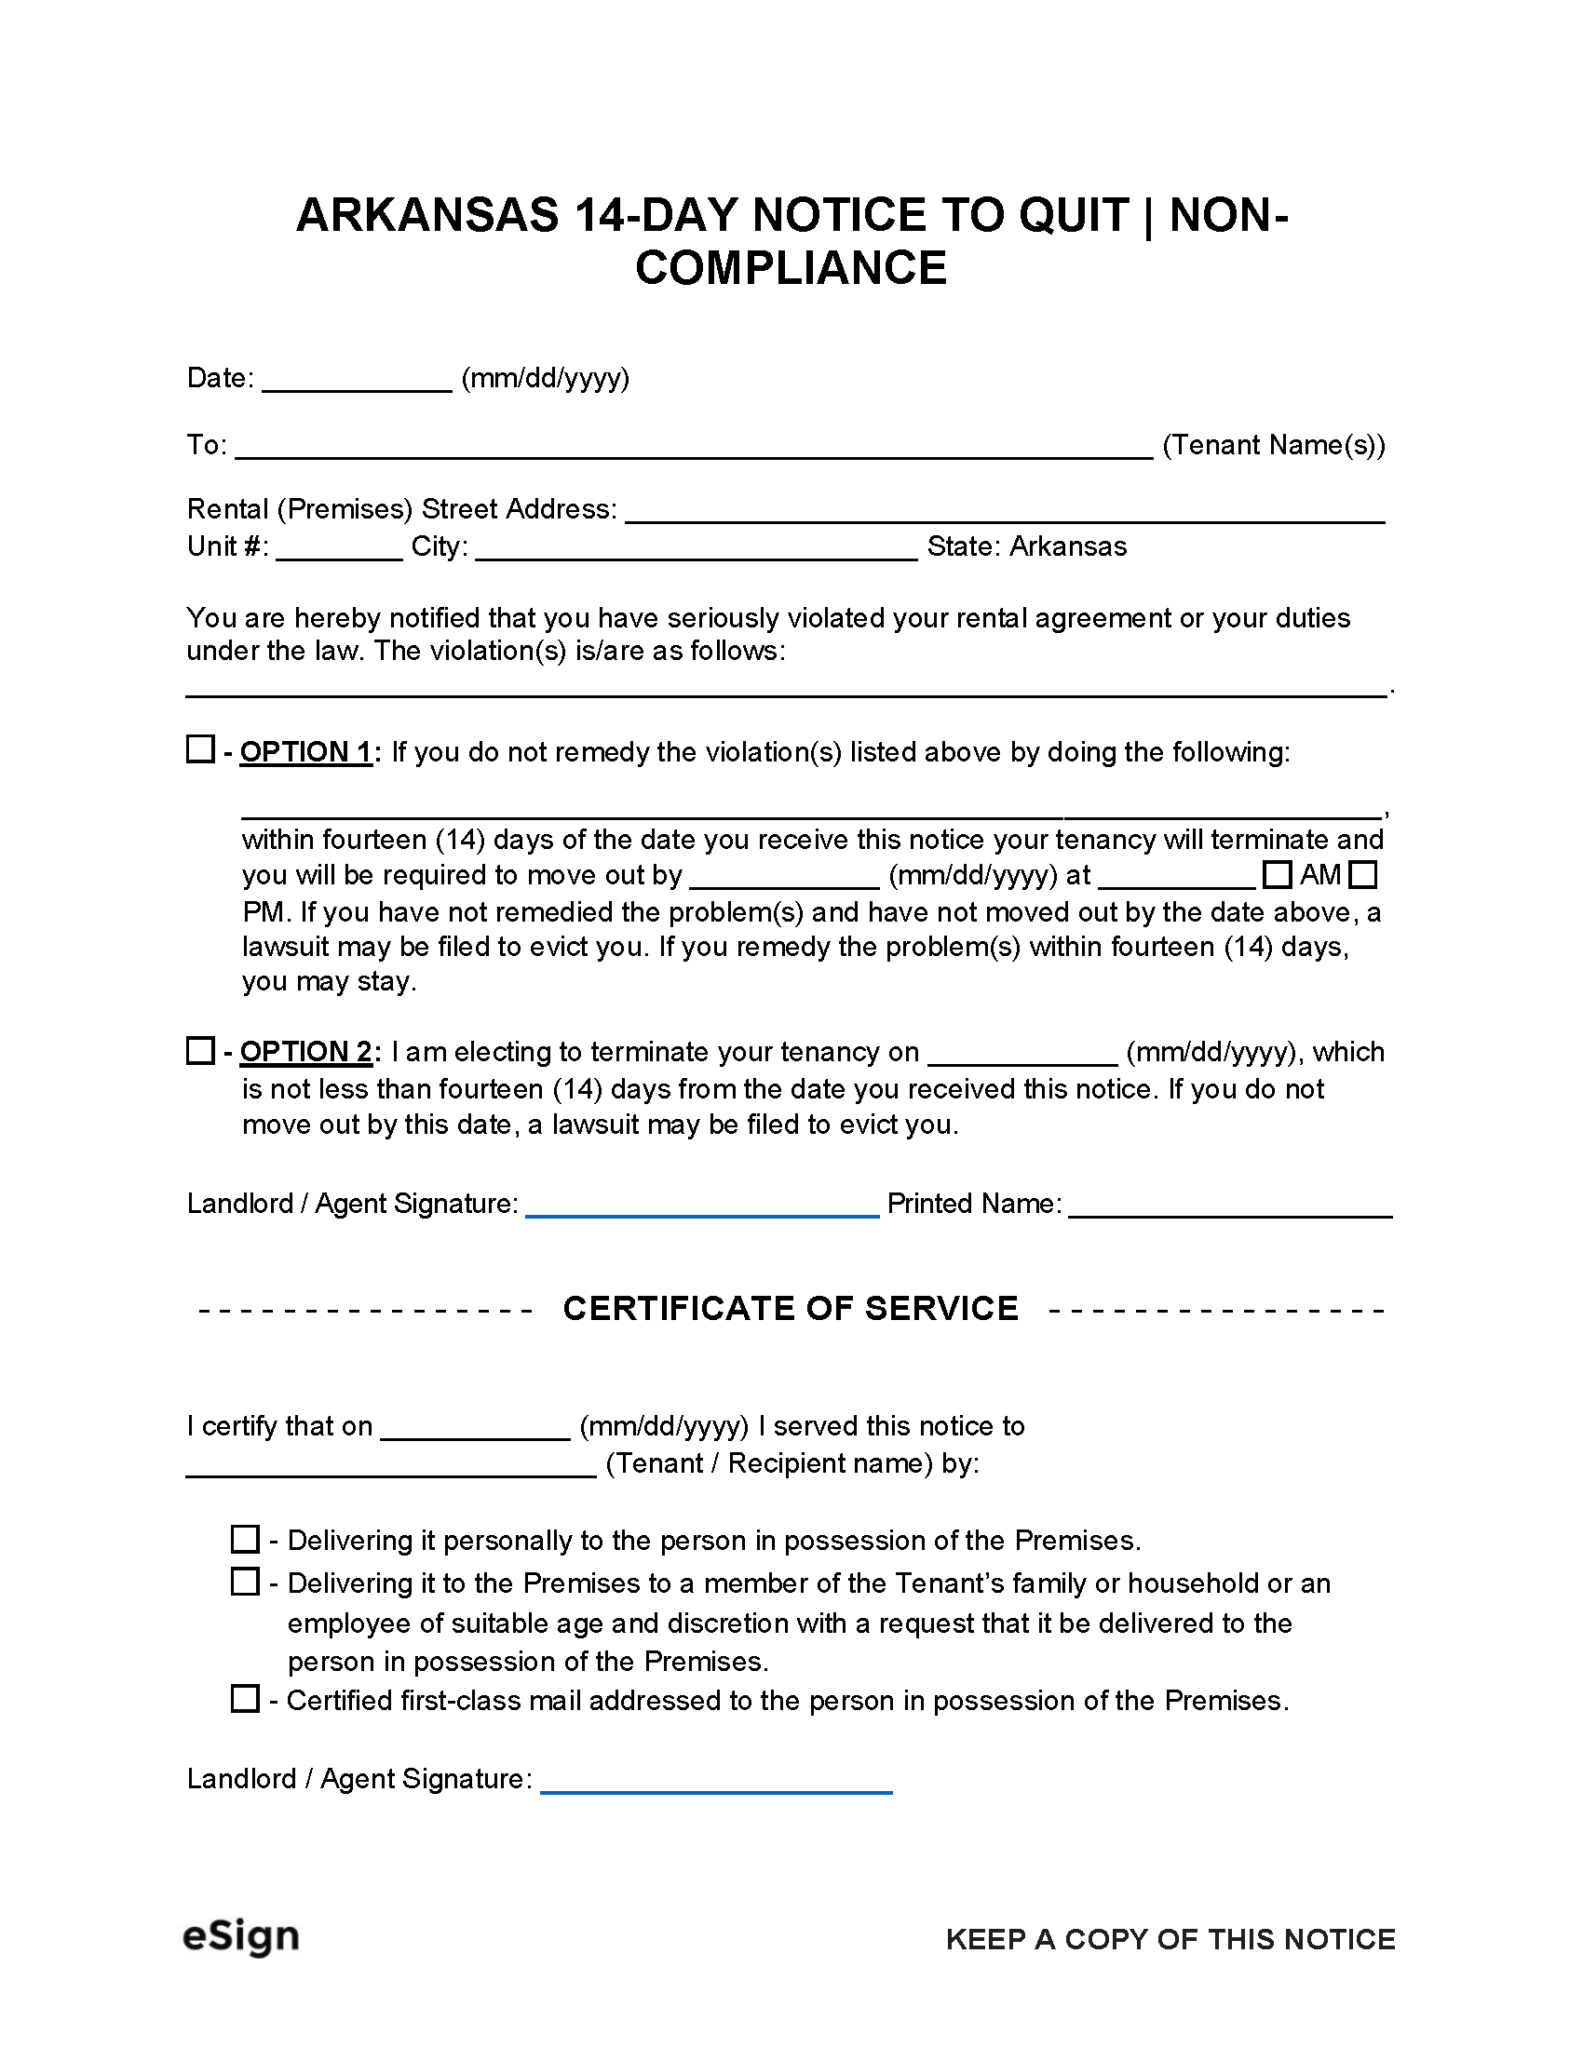 free-arkansas-14-day-notice-to-quit-non-compliance-pdf-word